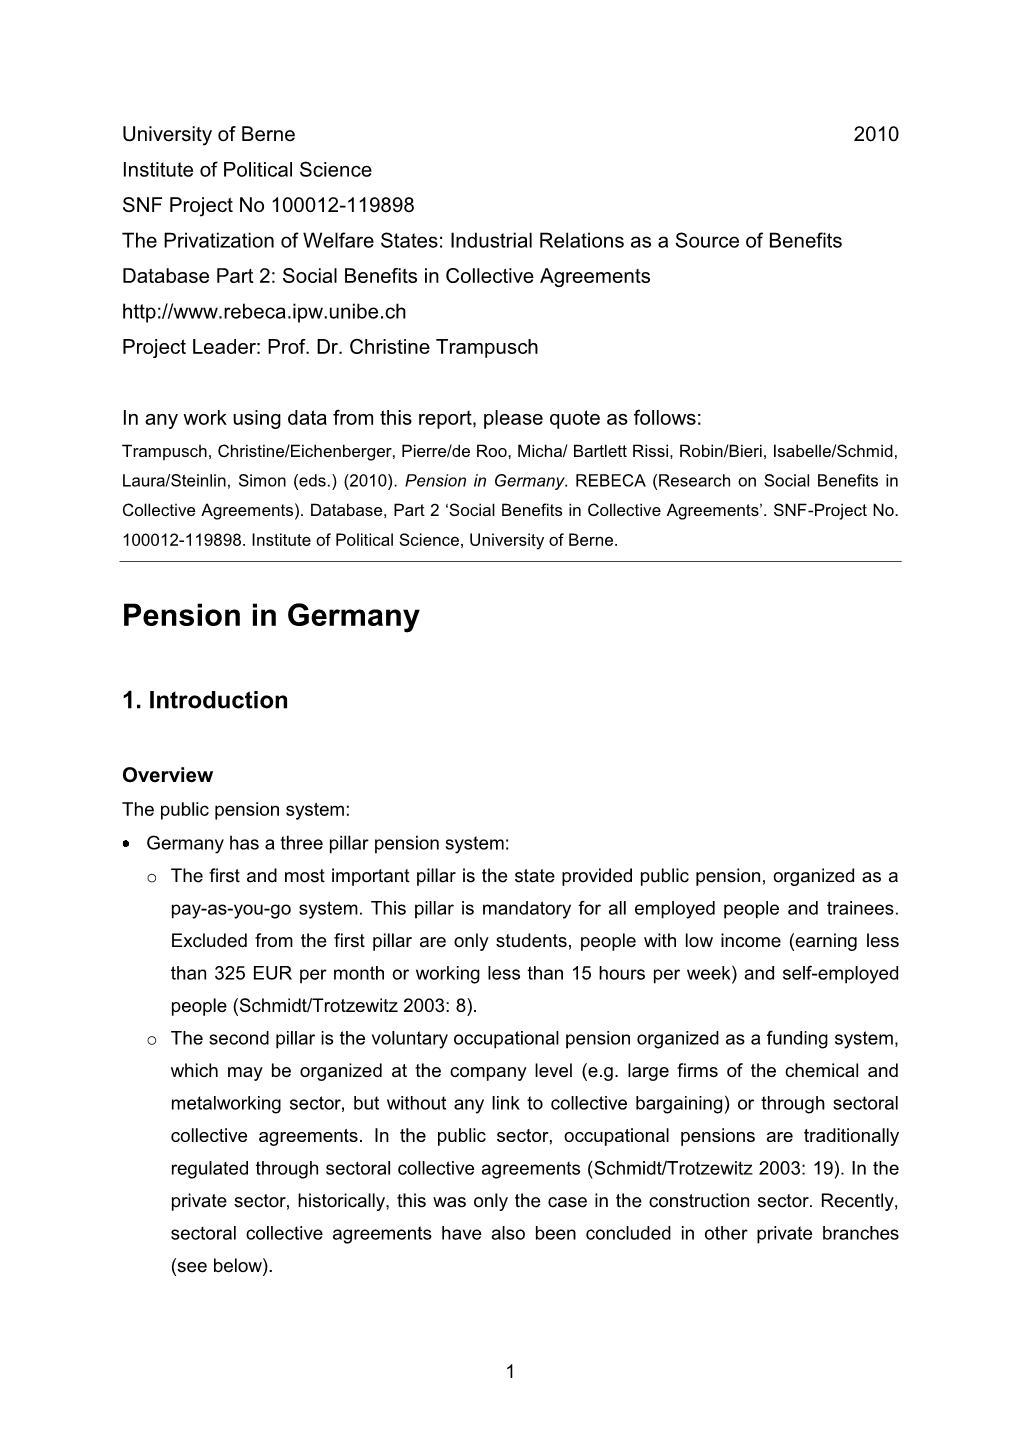 Pension in Germany